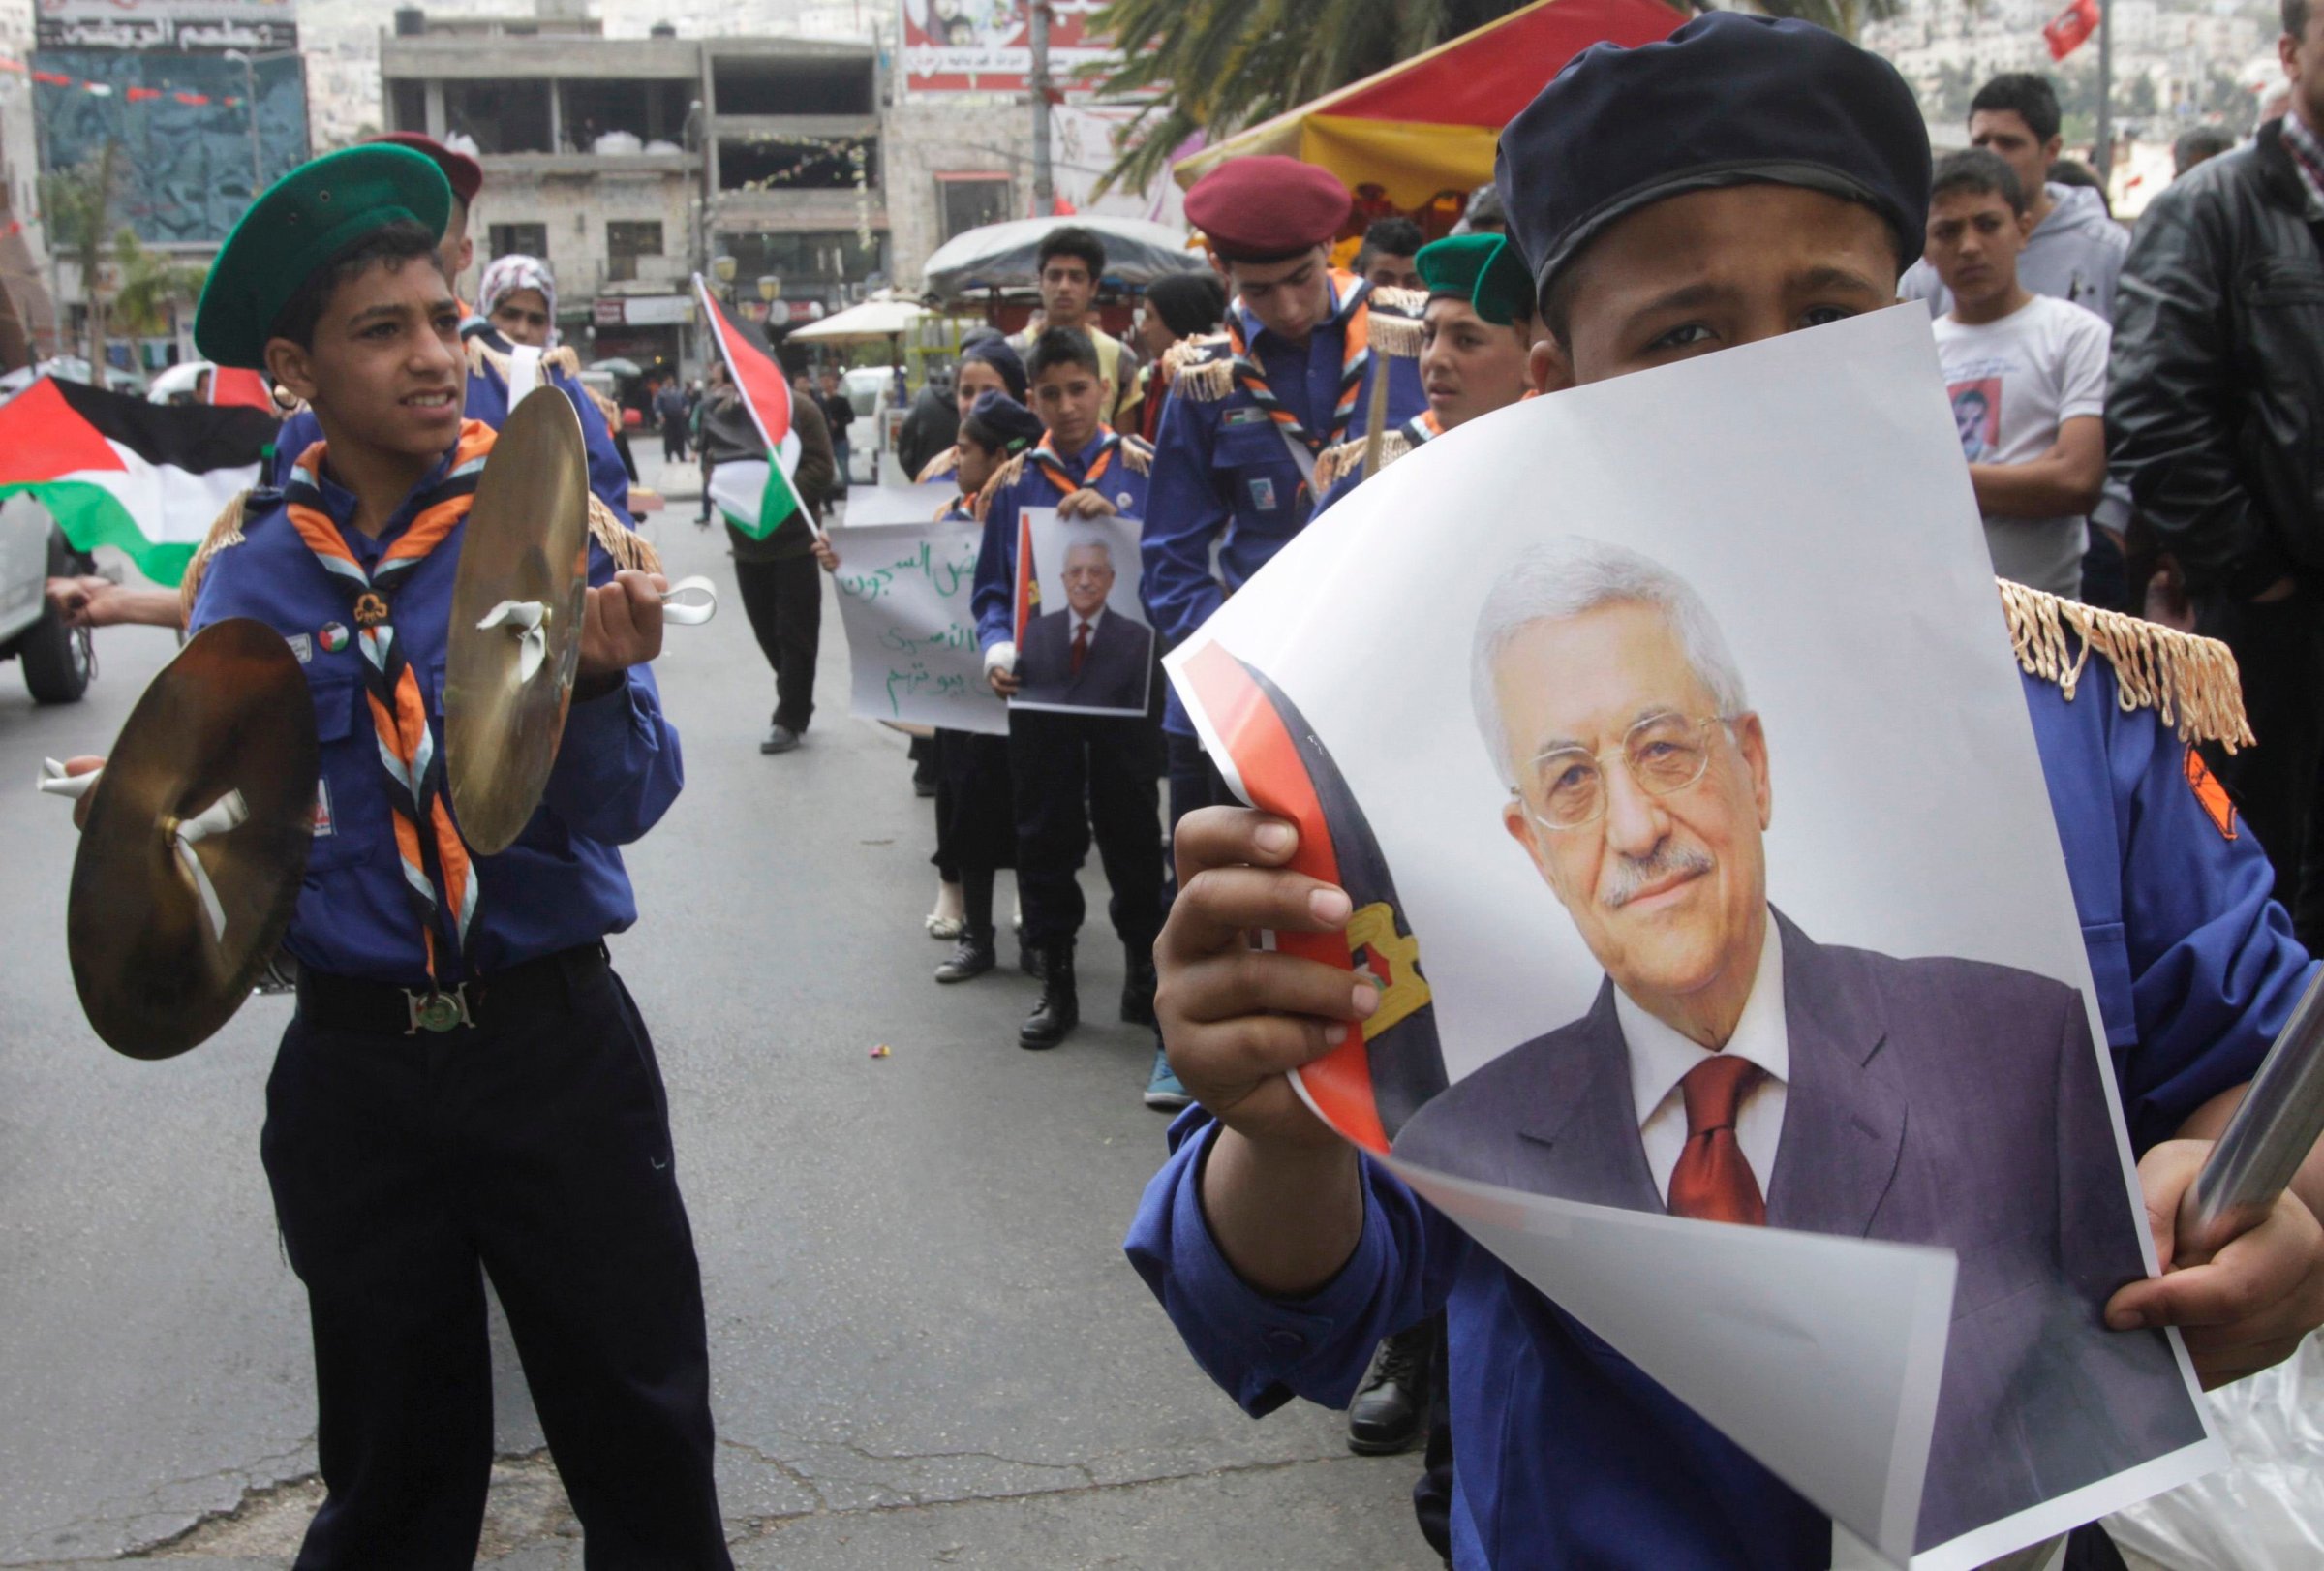 Palestinian scouts hold posters of Palestinian President Mahmoud Abbas during a Fatah rally in support of Abbas in the West Bank city of Nablus on April 2, 2014.